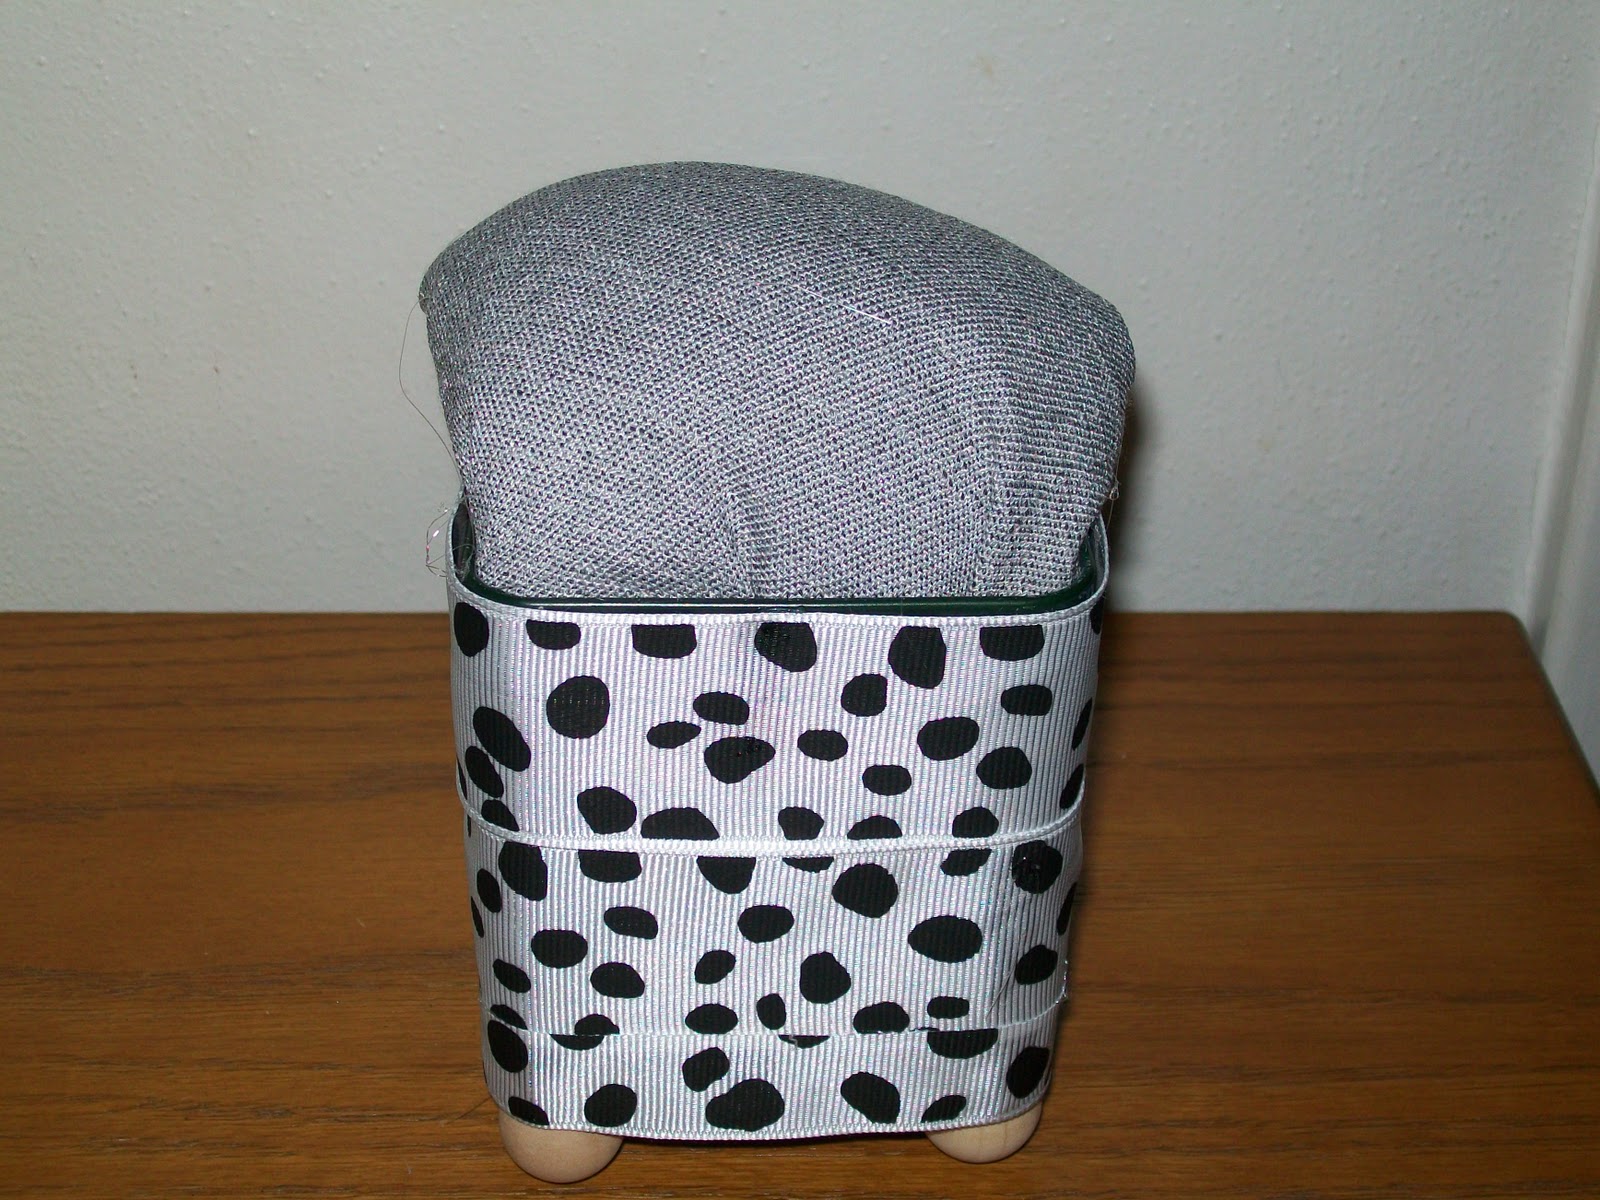 Crafts by Cori: LIMITED EDITION!!! Seeing Spots! Pin Cushion $5.00